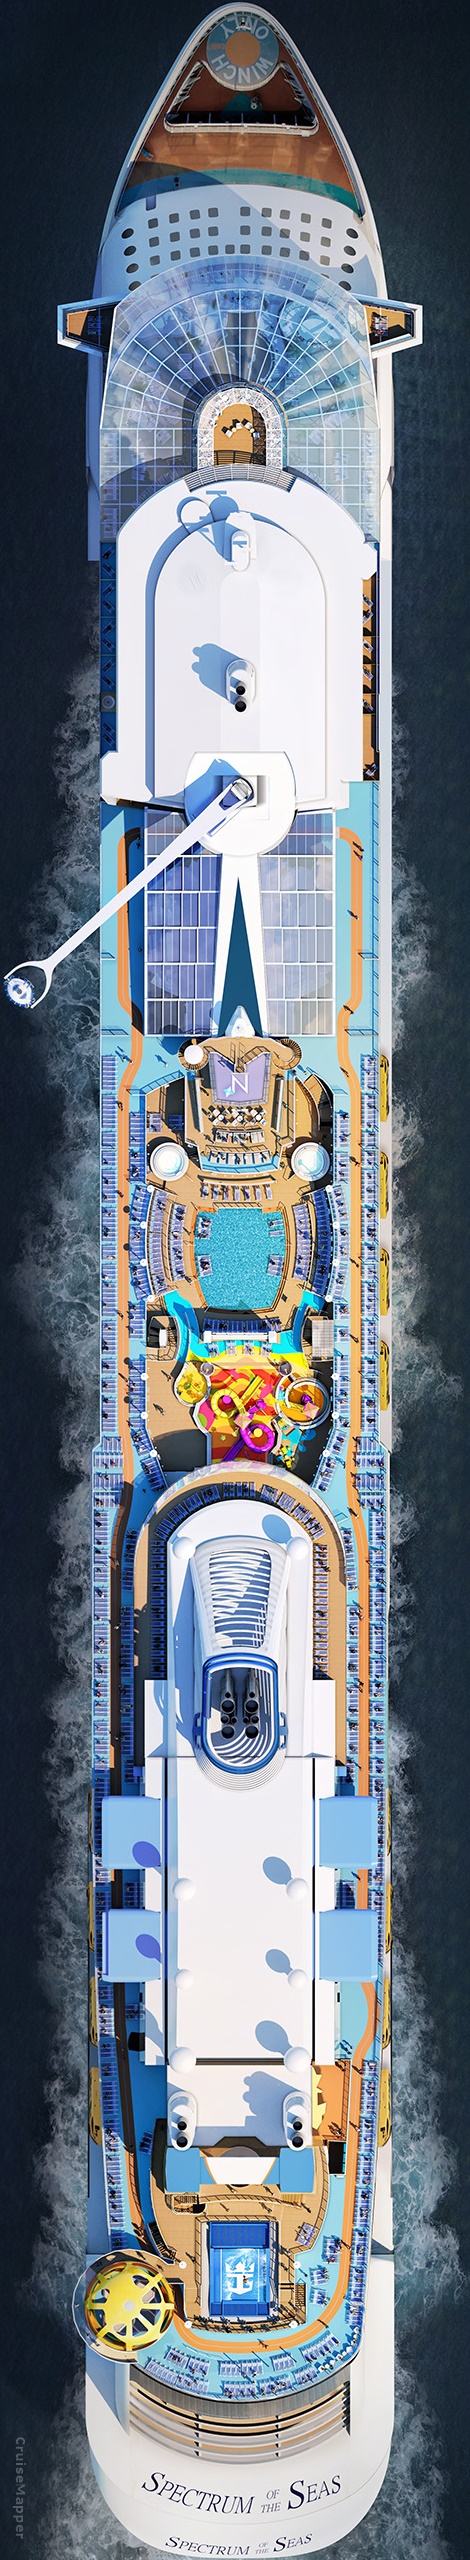 Royal Caribbean trademarks "Tracelet" for contact tracing wristband